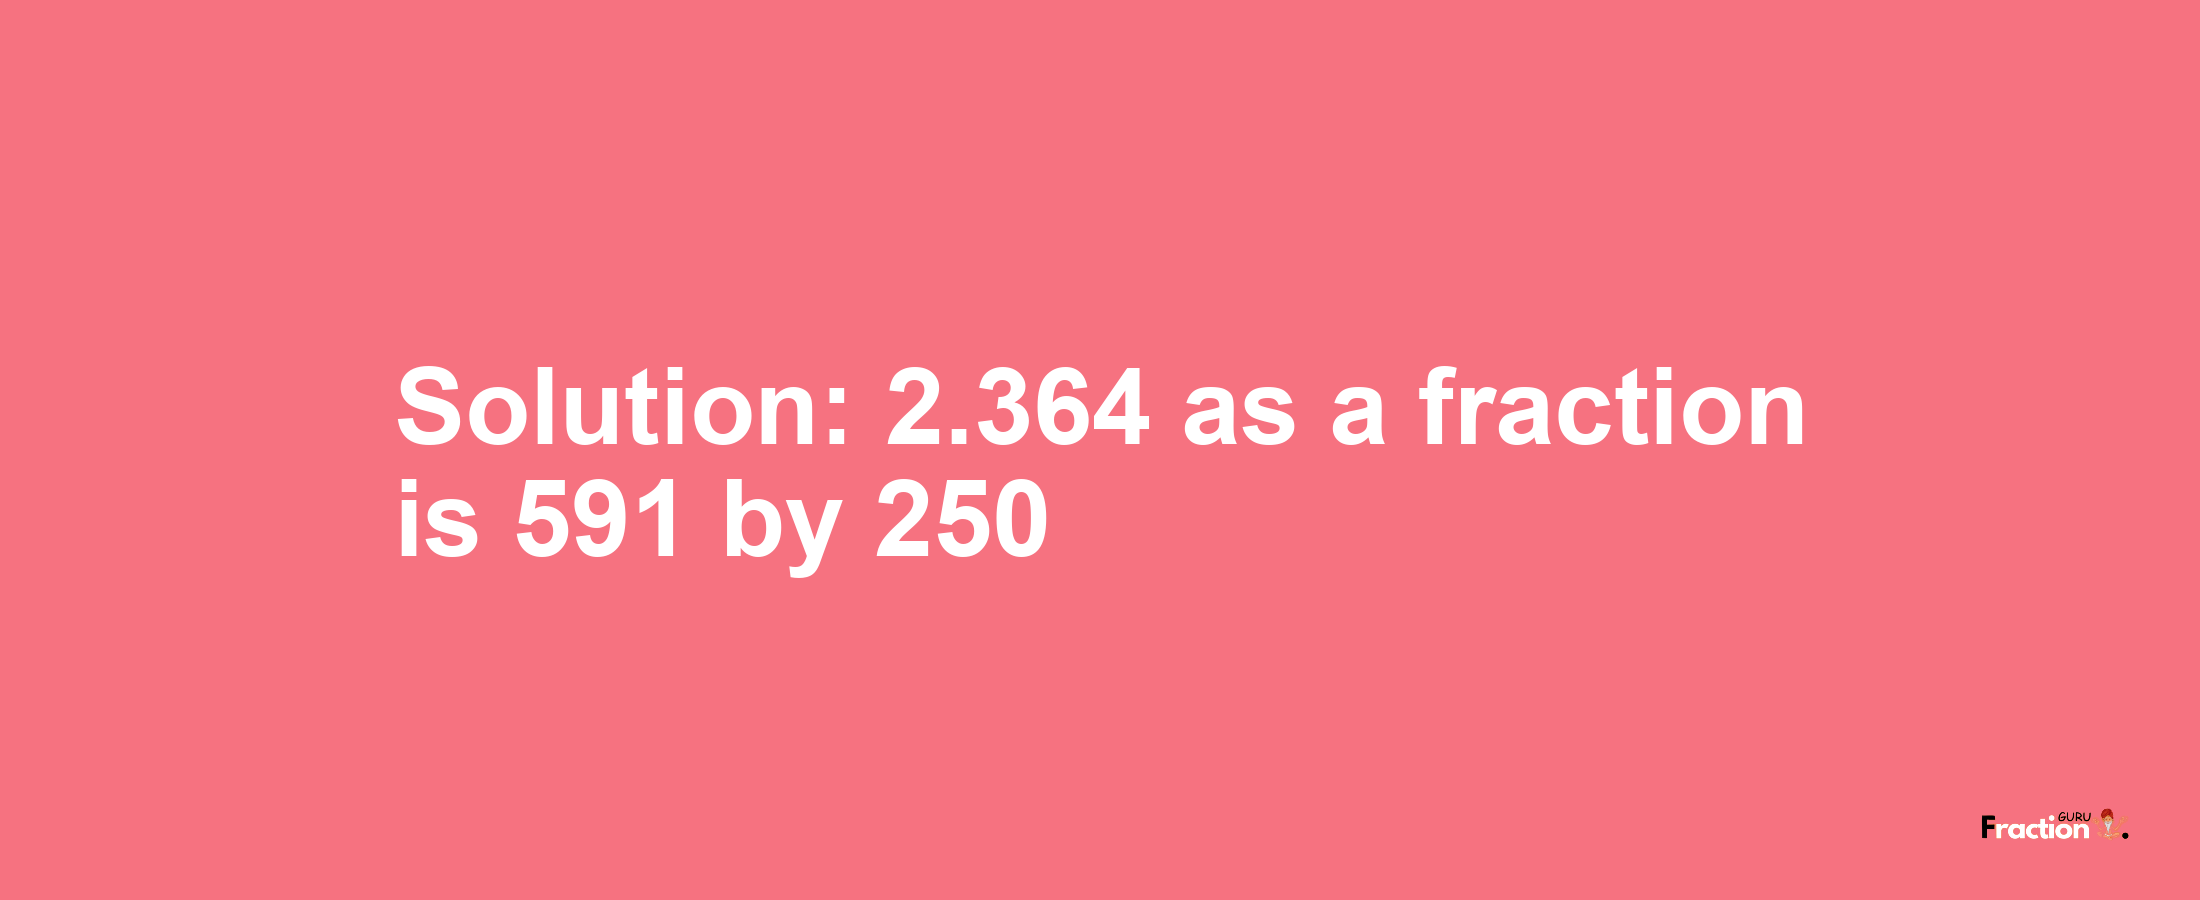 Solution:2.364 as a fraction is 591/250